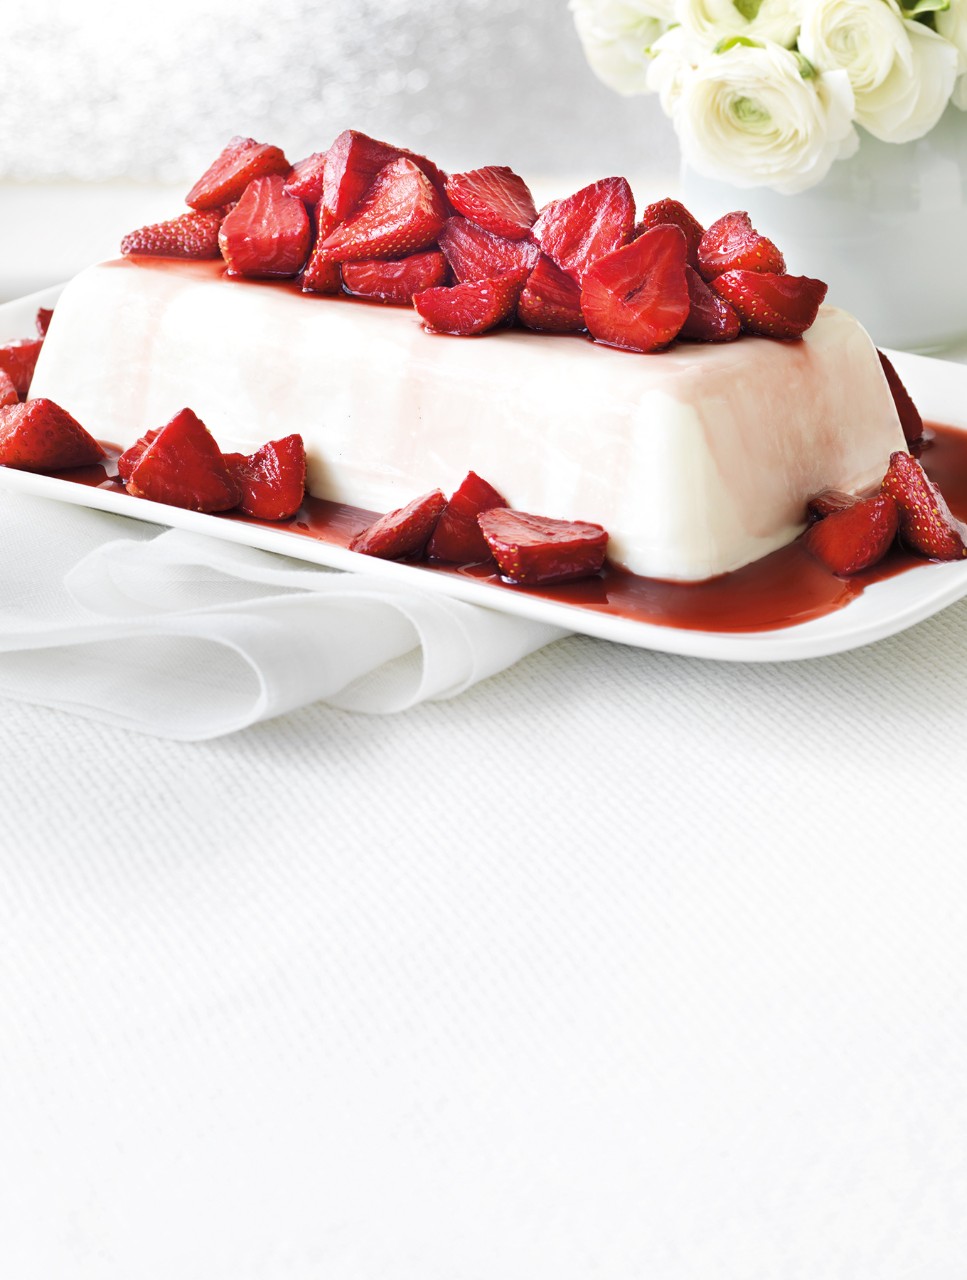 Buttermilk Jelly with Wine-Stewed Strawberries